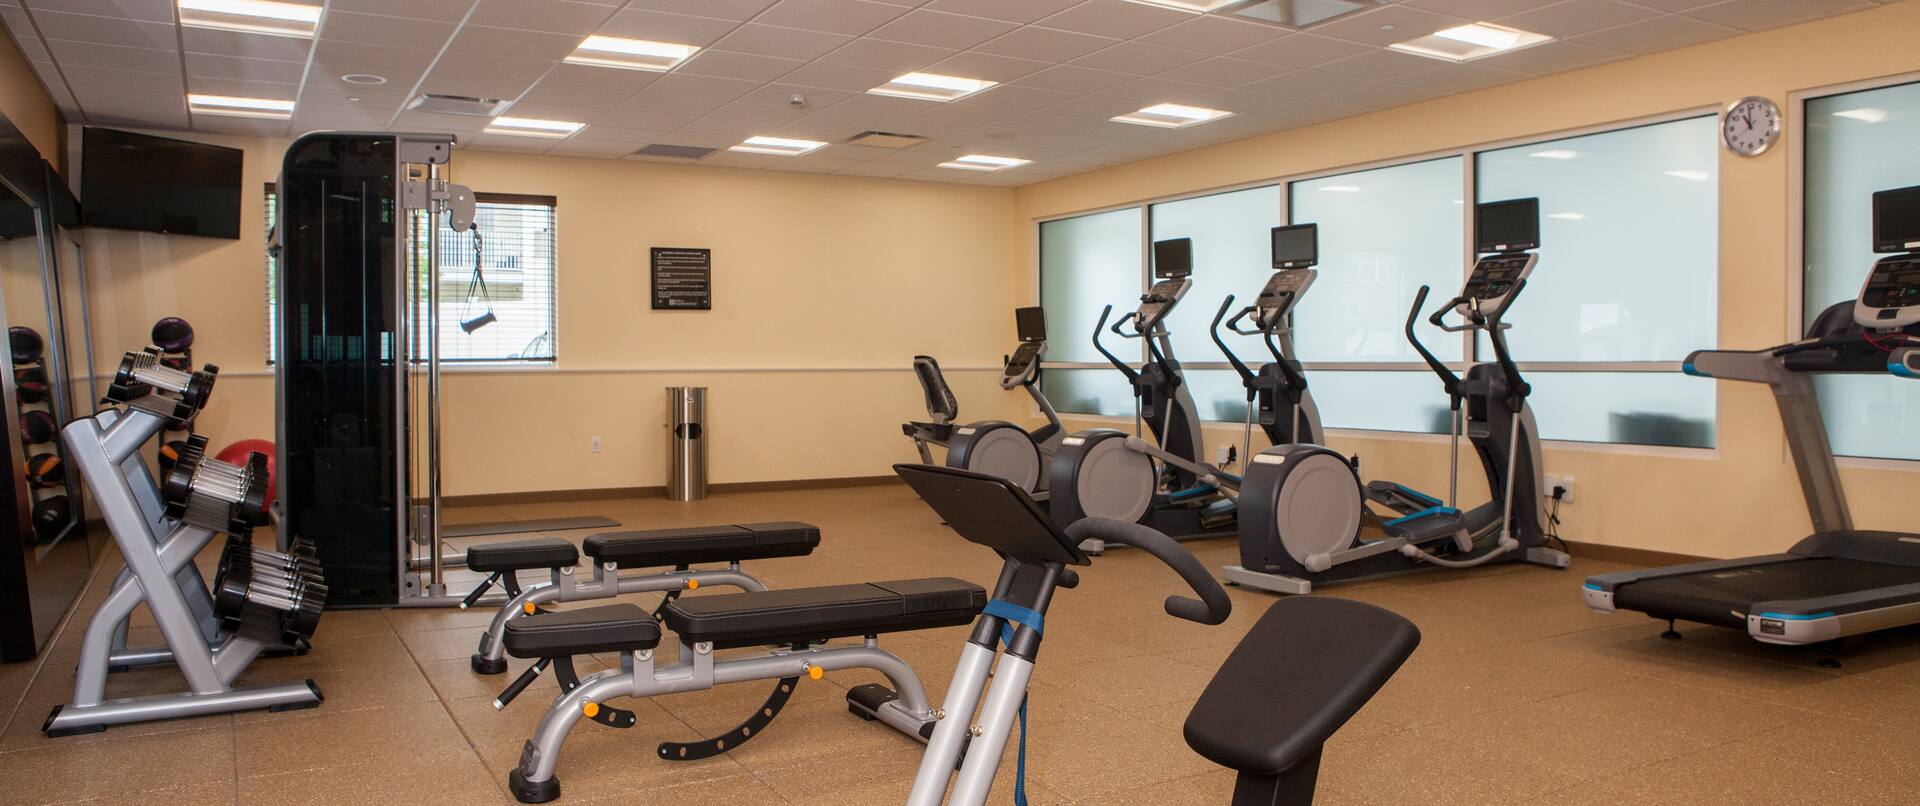 Fitness Center with Free Weights, Benches, and Cardio Equipment